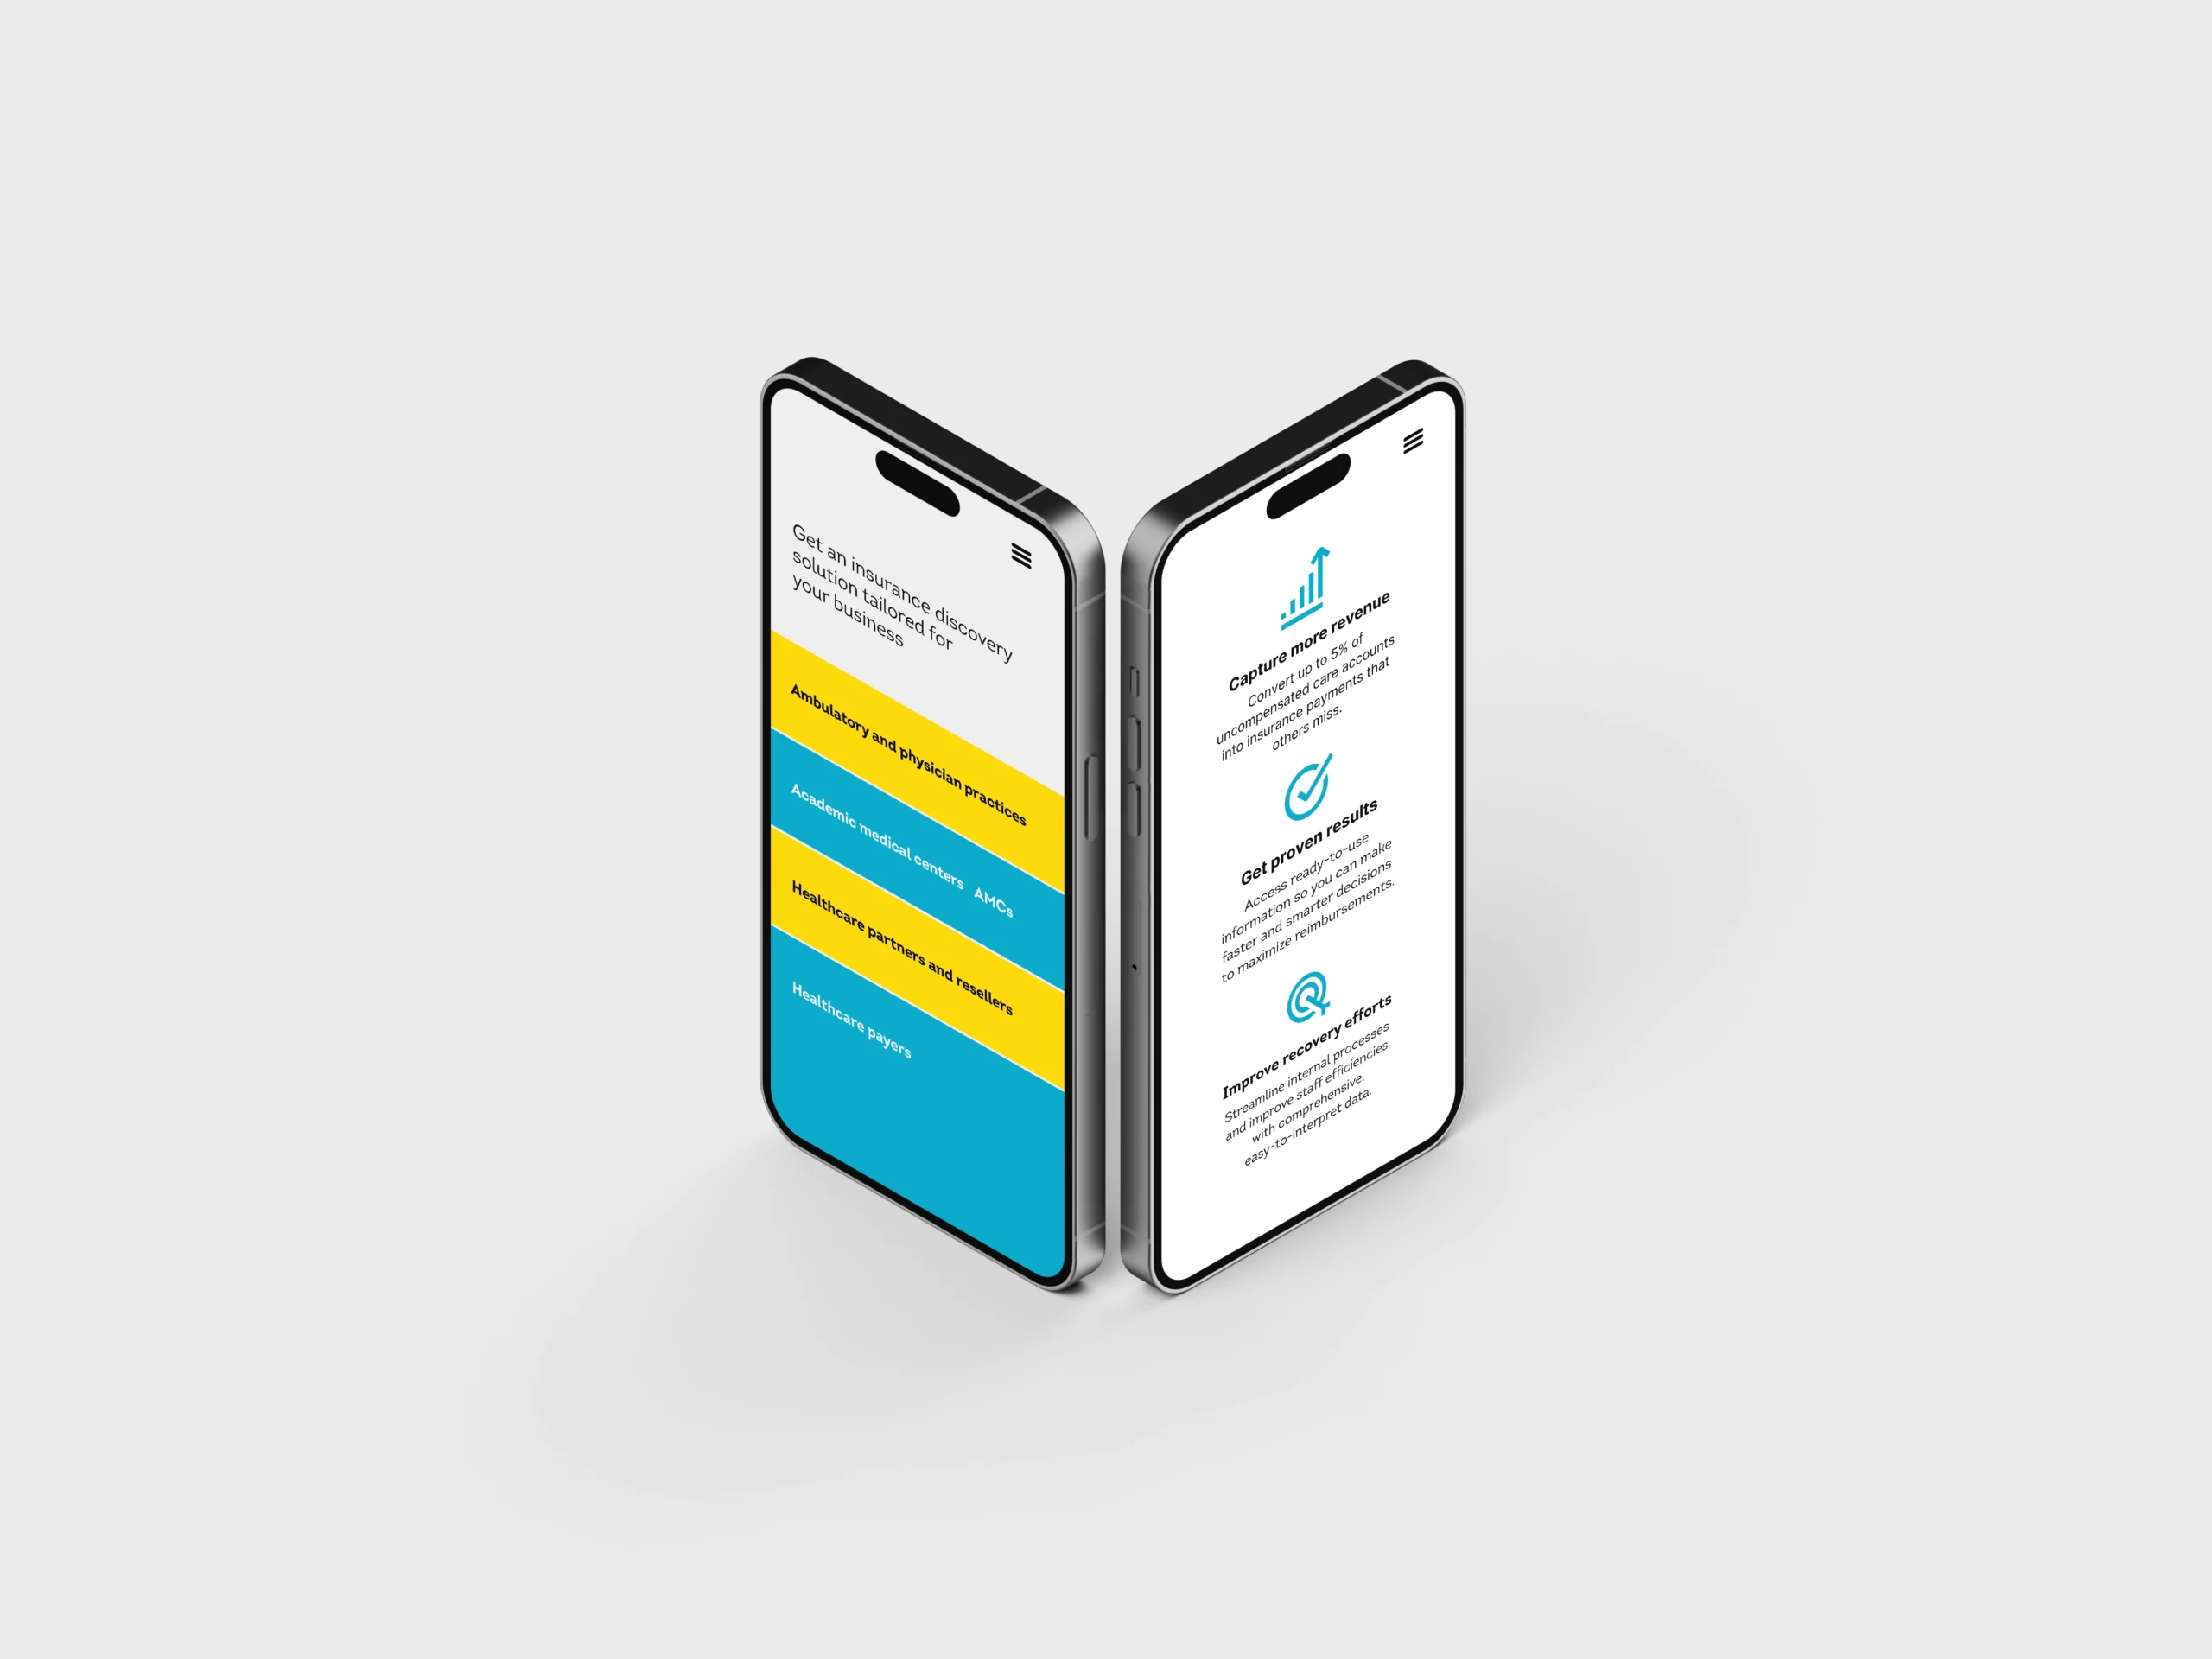 Two mobile screen devises showcasing UX designs for a financial services website.